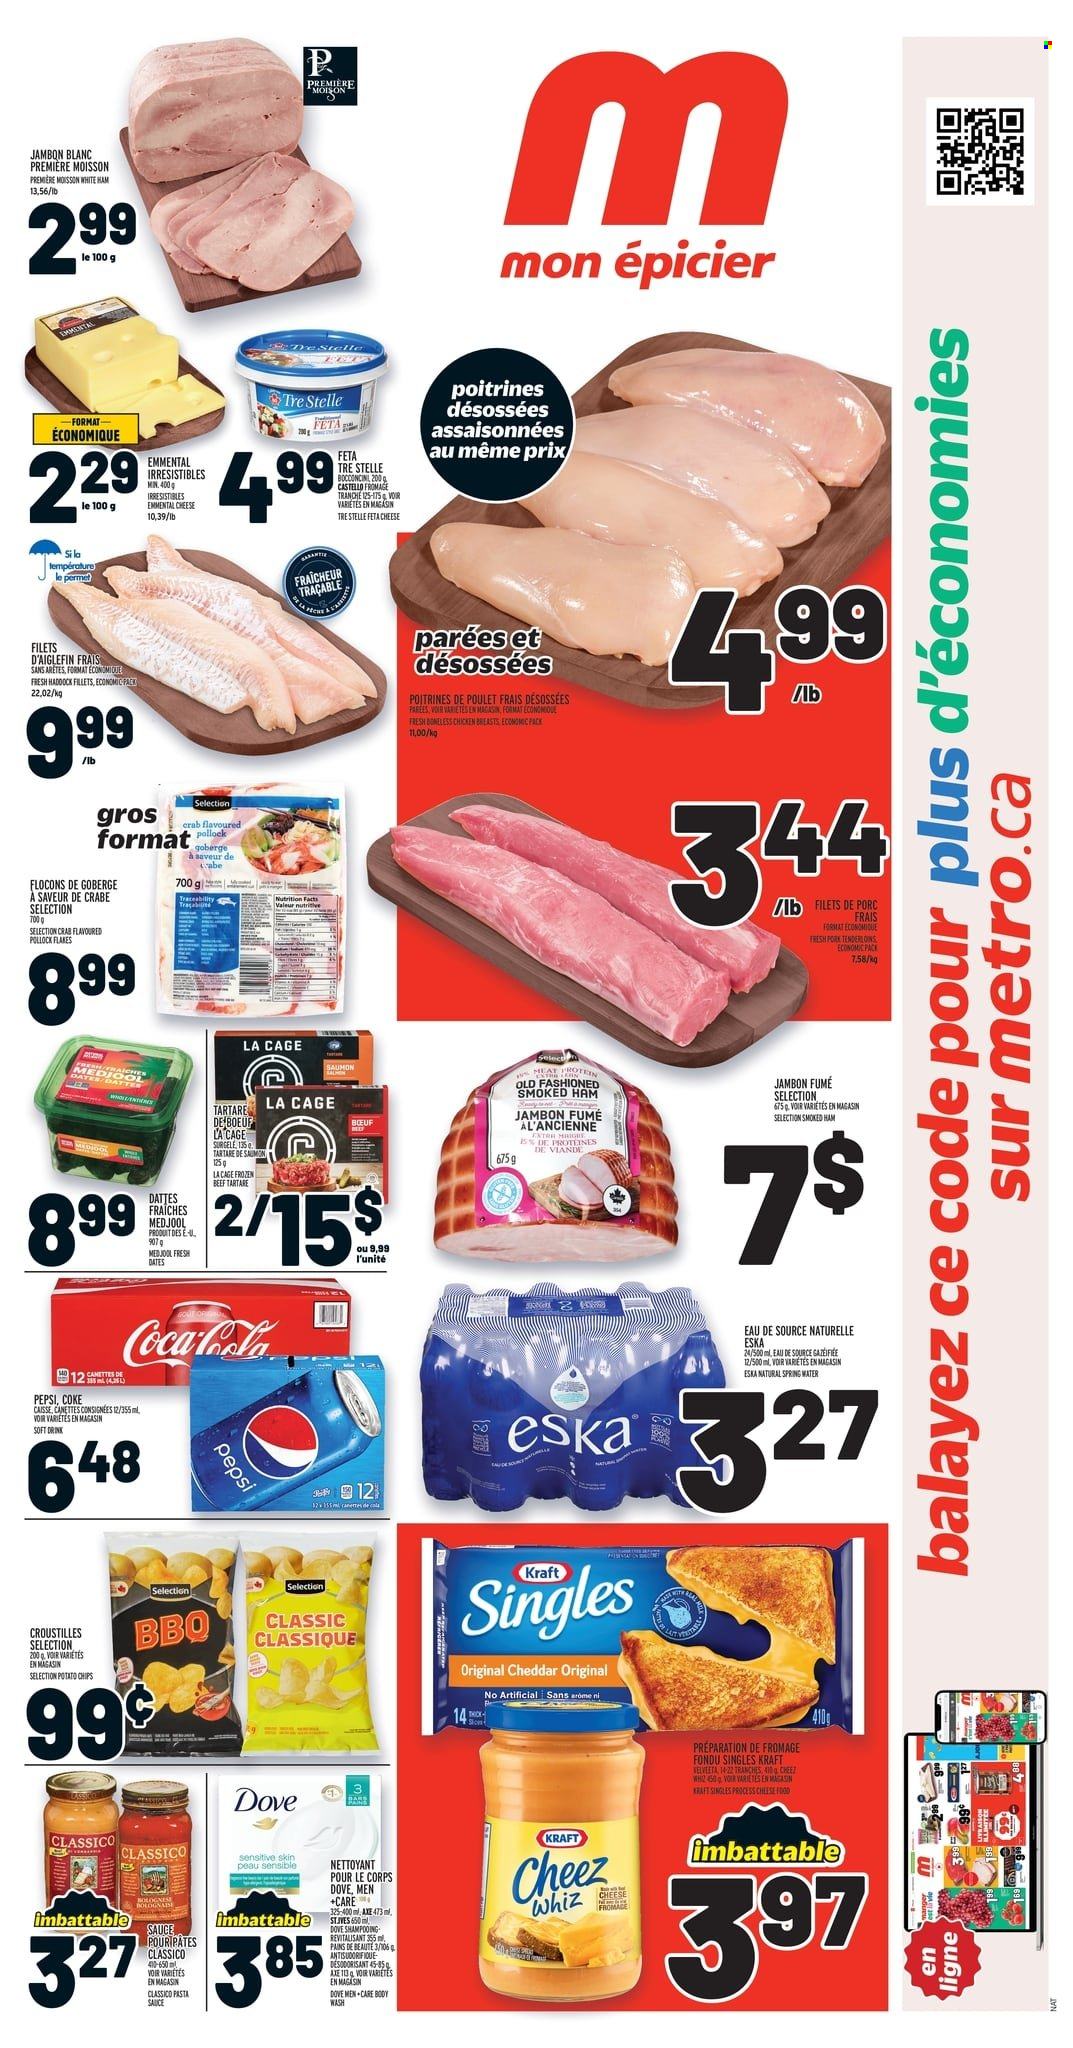 thumbnail - Metro Flyer - March 23, 2023 - March 29, 2023 - Sales products - haddock, pollock, crab, pasta sauce, sauce, Kraft®, ham, smoked ham, bocconcini, sandwich slices, cheese, feta, Kraft Singles, Dove, potato chips, Classico, Coca-Cola, Pepsi, soft drink, Coke, spring water, water, chicken breasts, chicken, Axe, fork, PREMIERE, cage. Page 1.